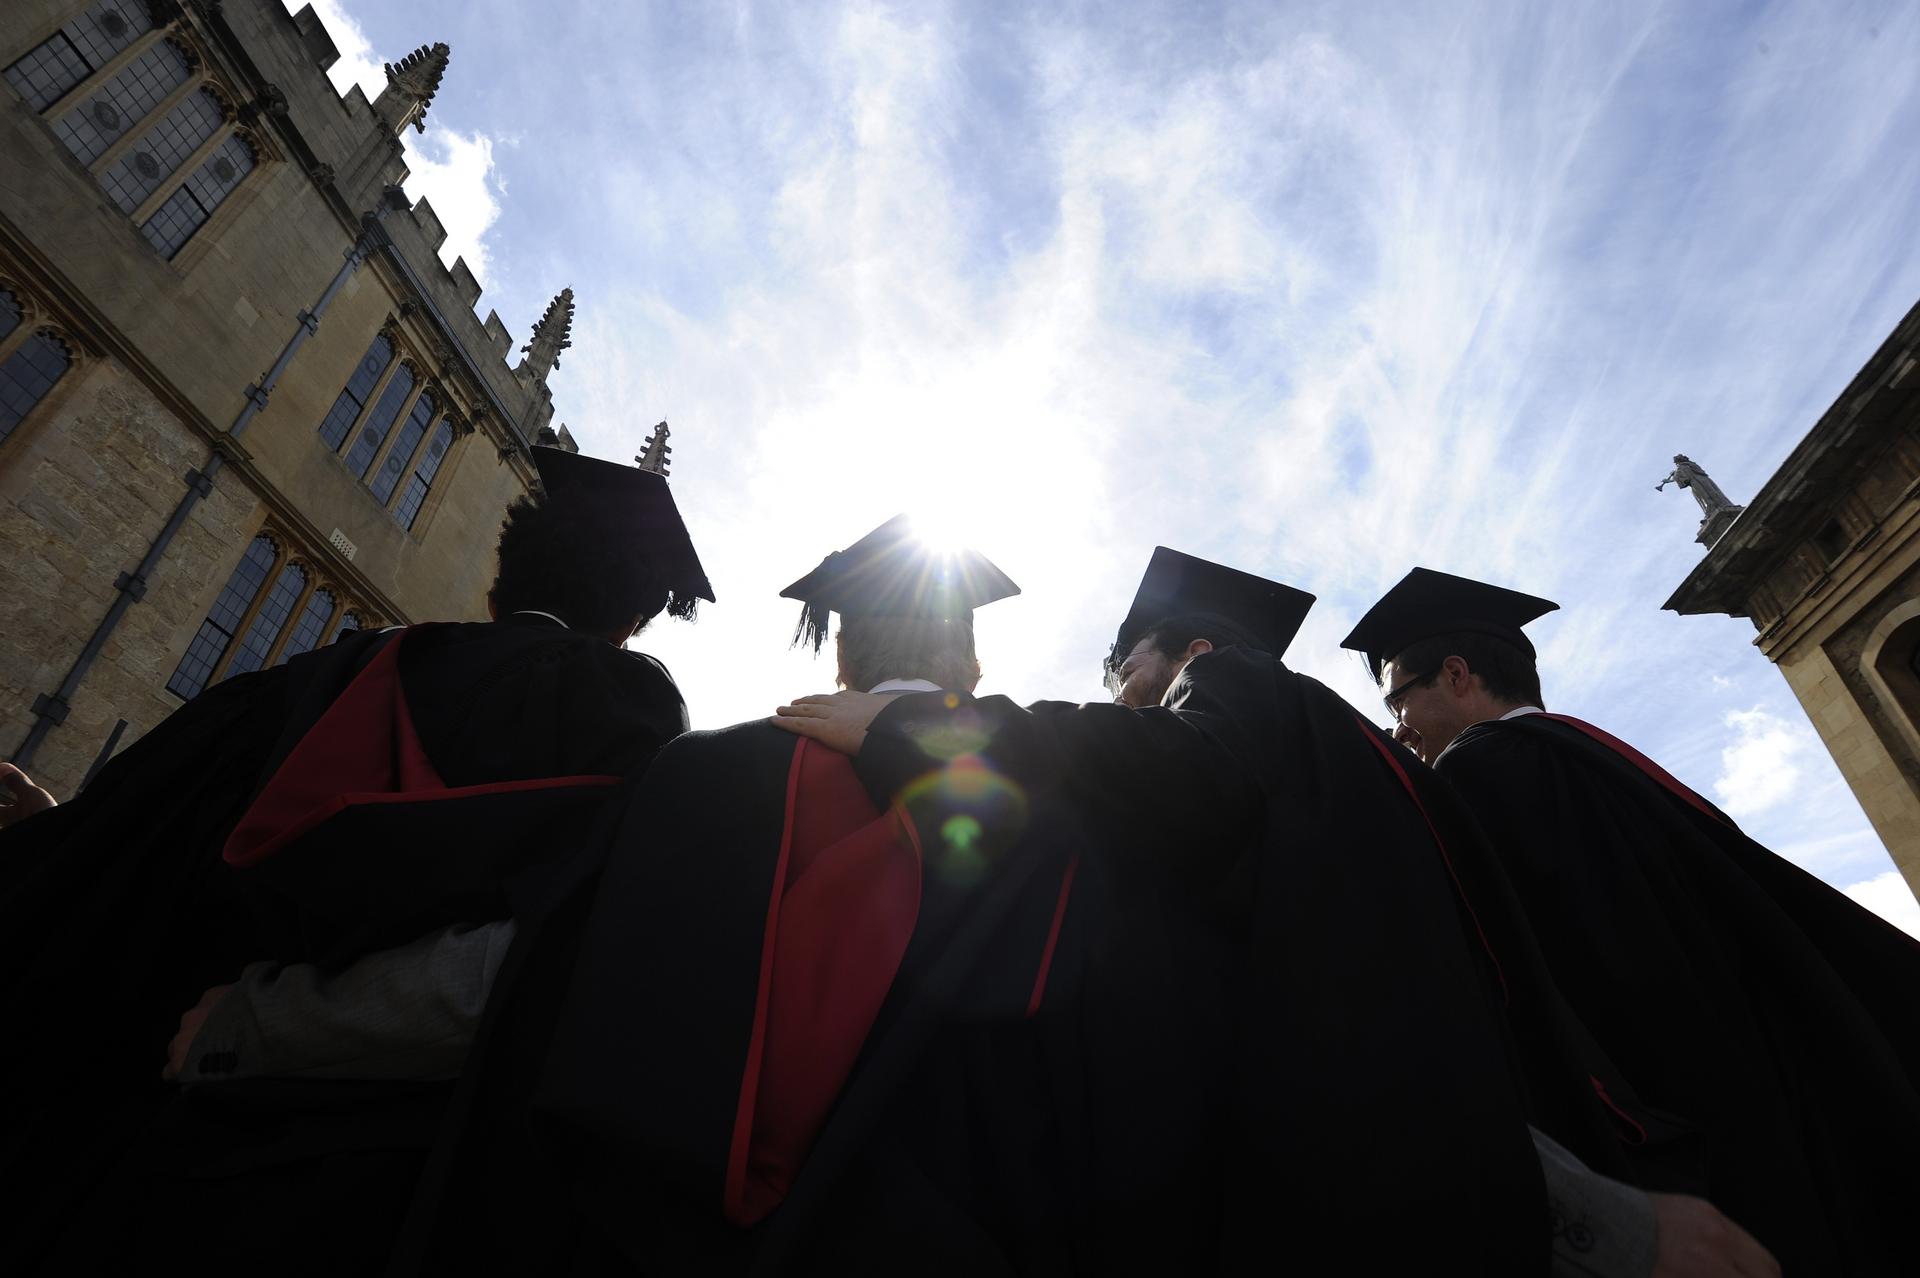 Graduates at Oxford University, England. Oxford is among a handful of top universities in Britain that are not increasing student enrolments. Photo: Reuters